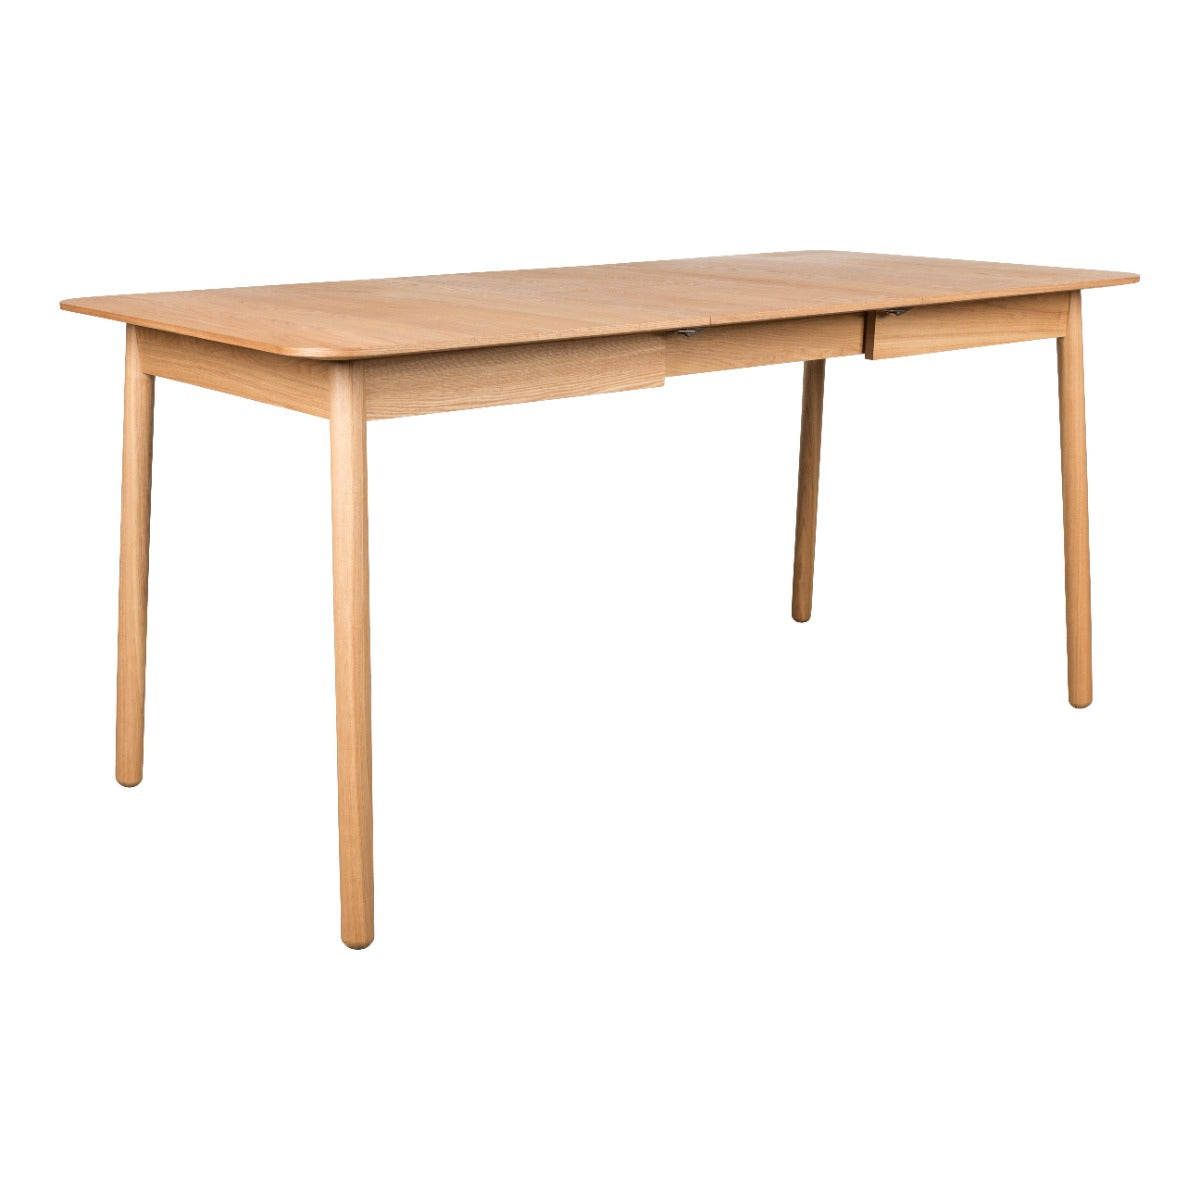 GLIMPS table 120/162 x 80 ash, Zuiver, Eye on Design